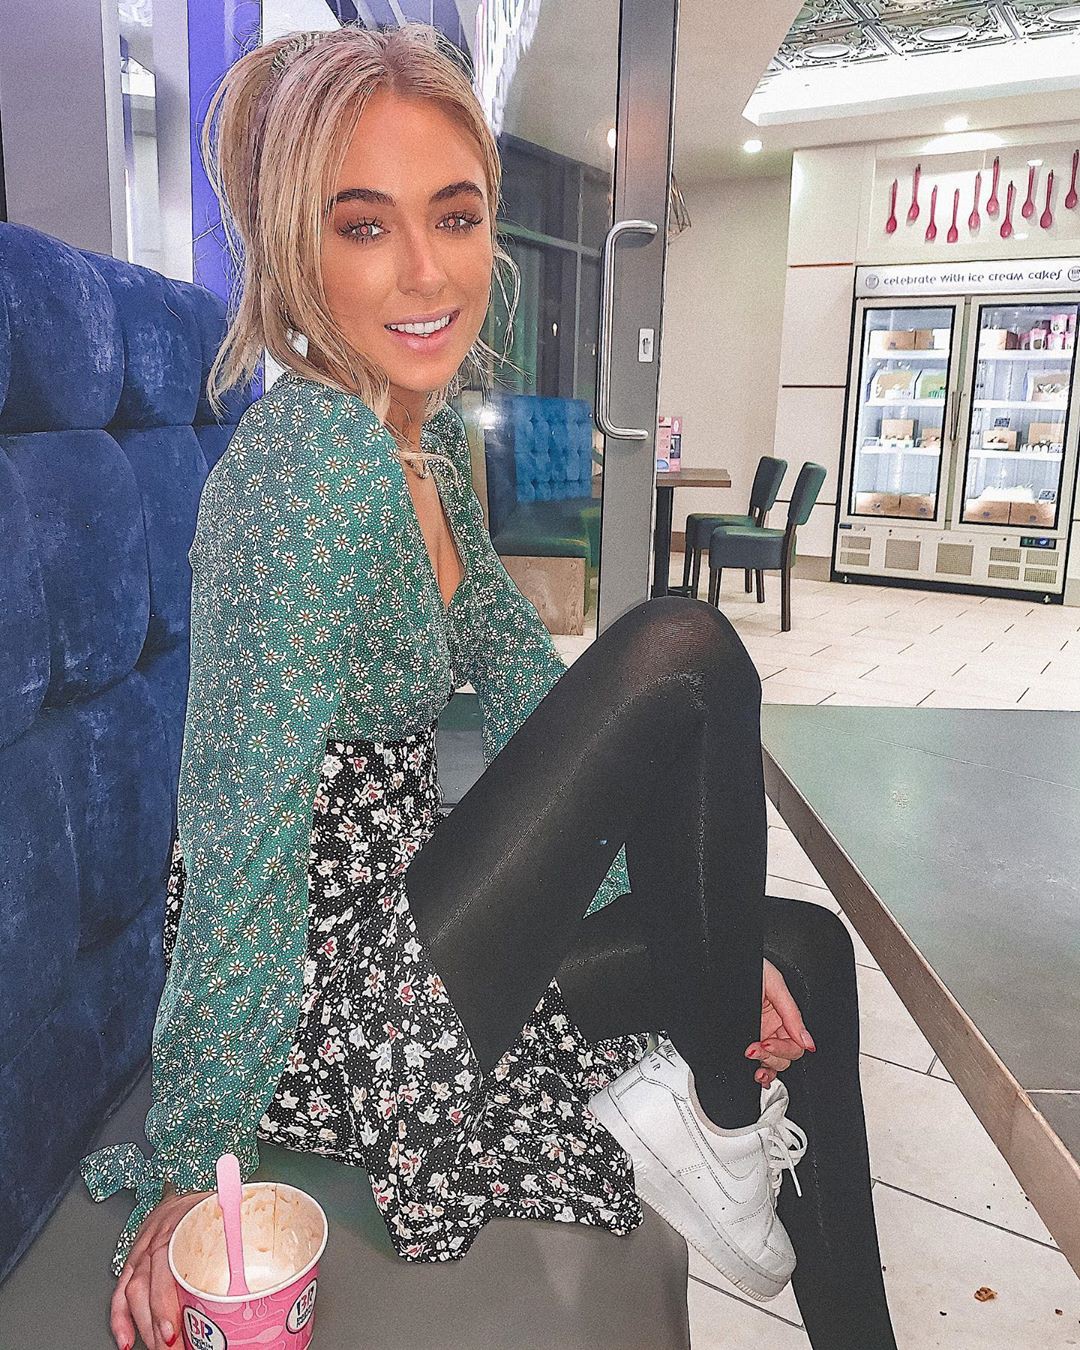 turquoise clothing ideas with leggings, jeans, legs pic: Nicola Hughes  